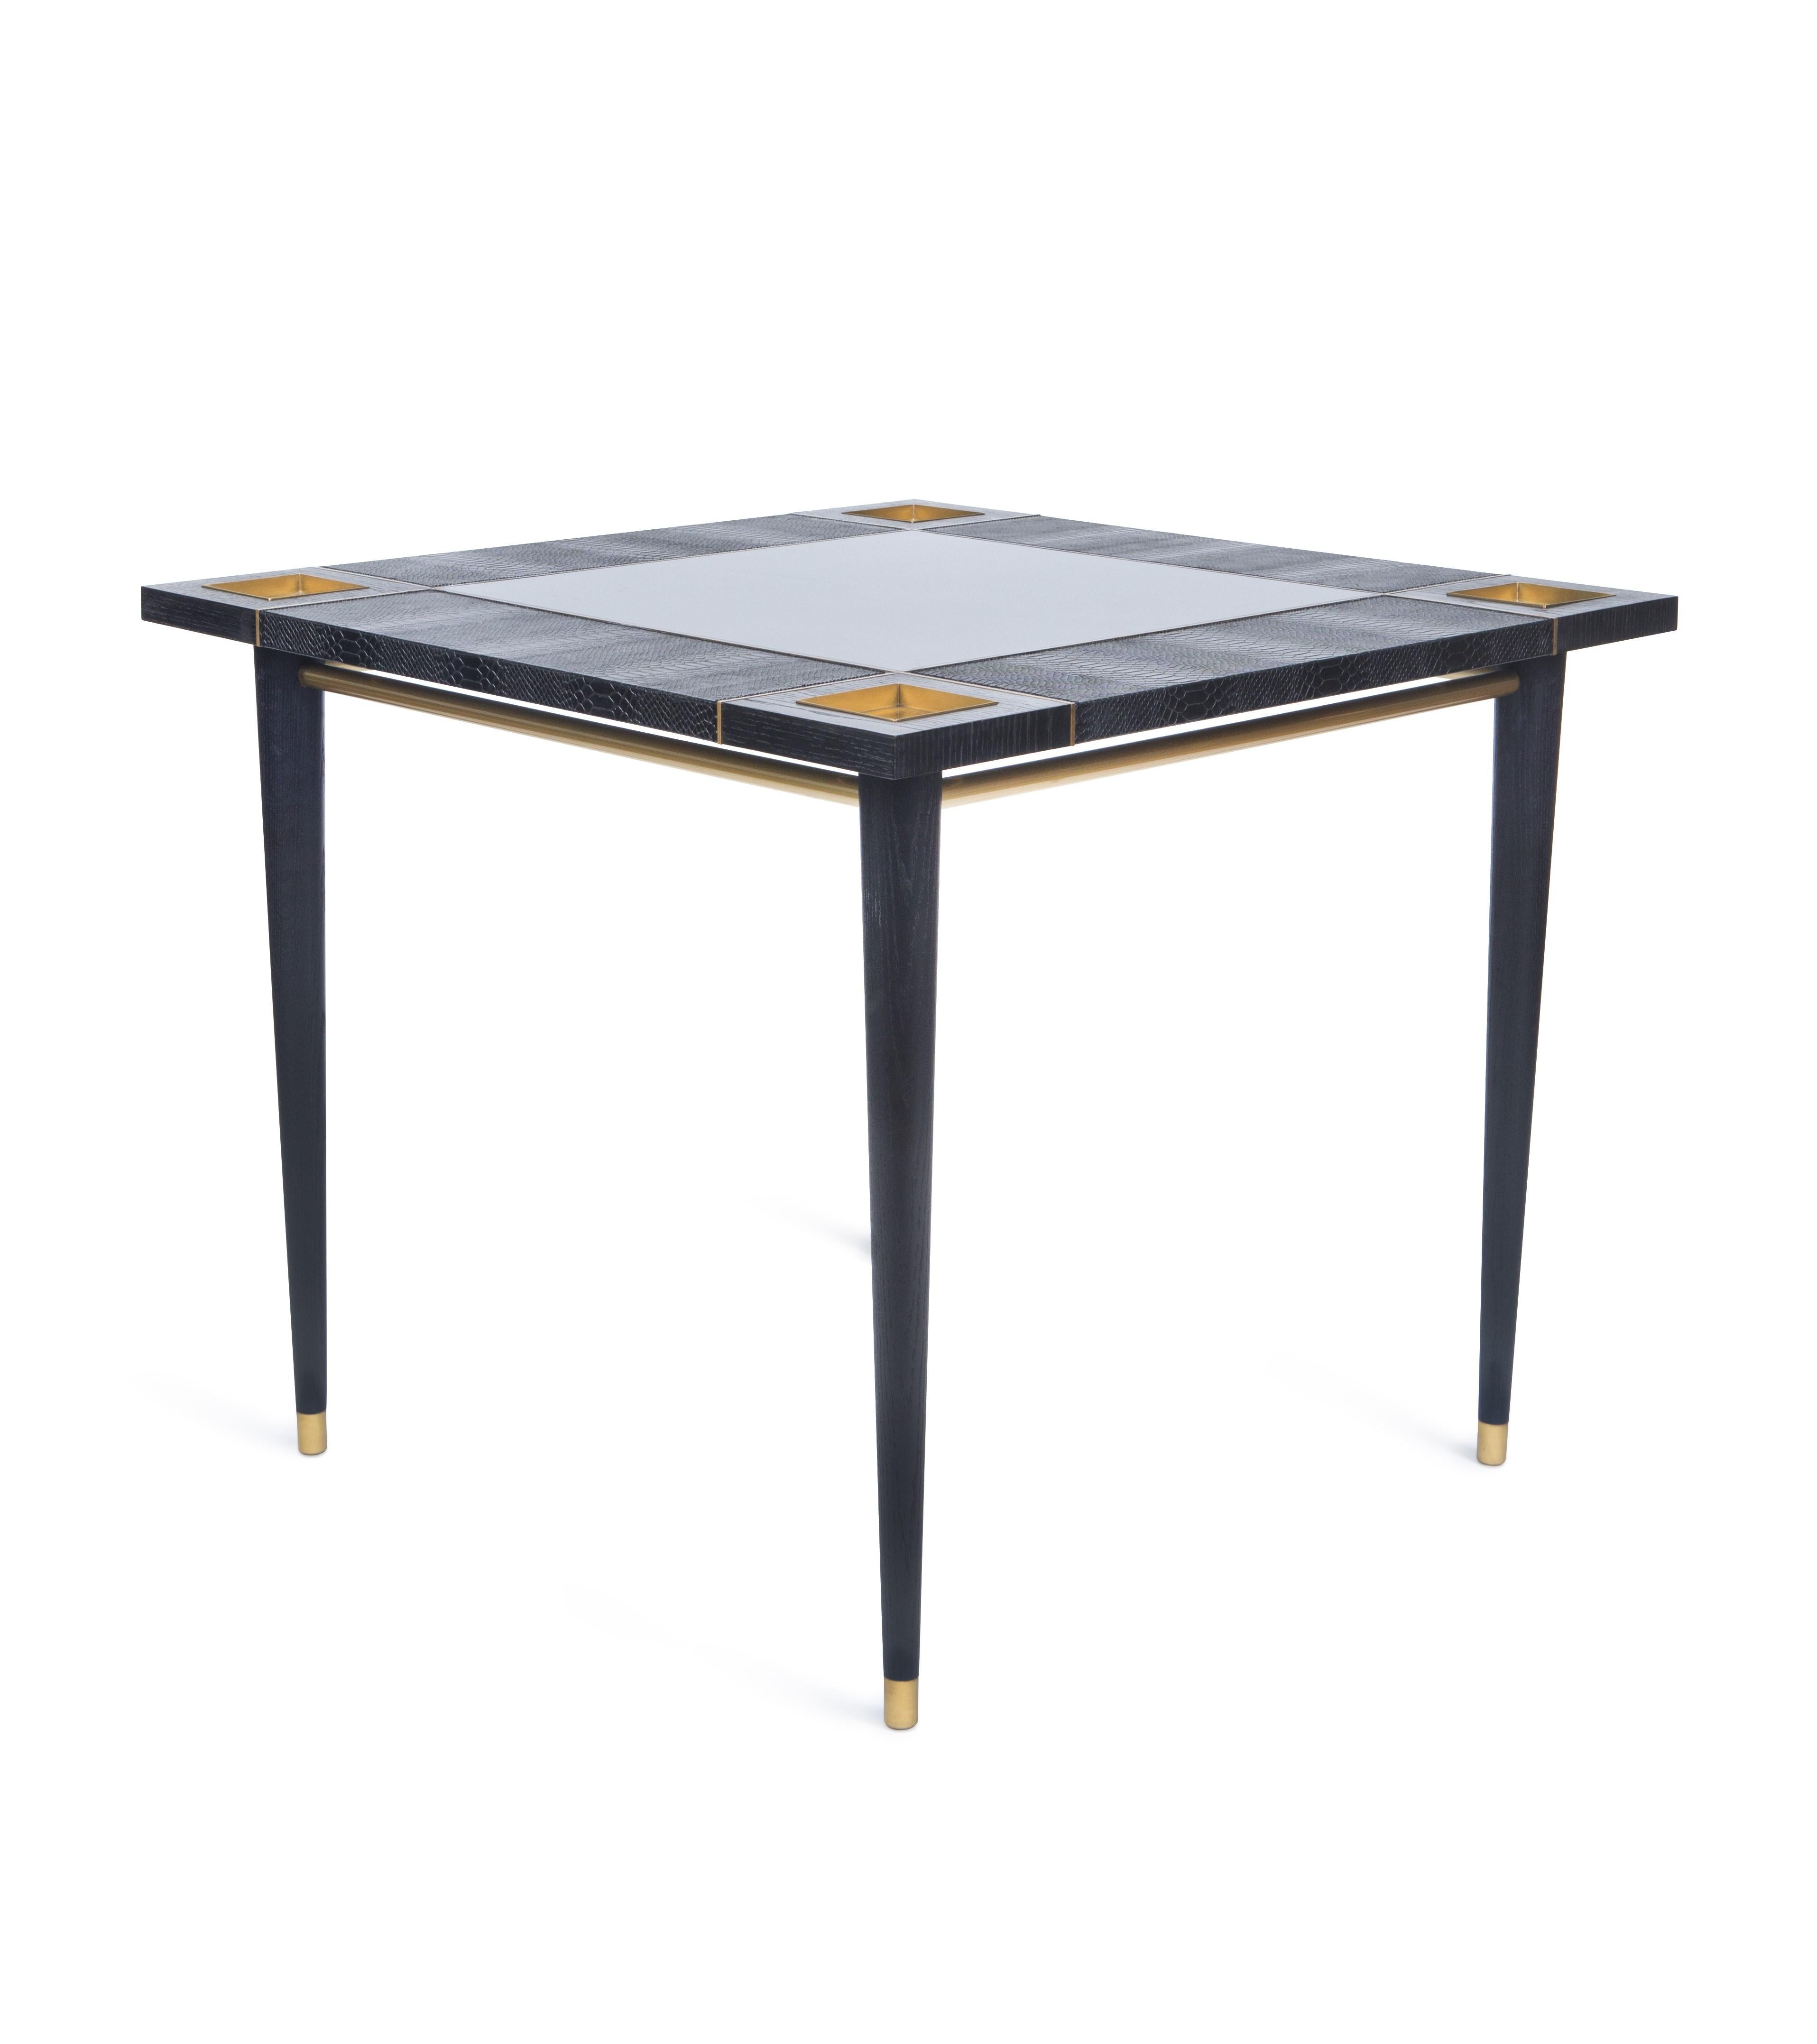 A piece that elevates the concept of ‘gaming table’ through the use of exotic luxury leather, lacquer and brass. A true statement piece that appeals to the touch and perfectly embodies the rich game of contrast and textures.

The price doesn't